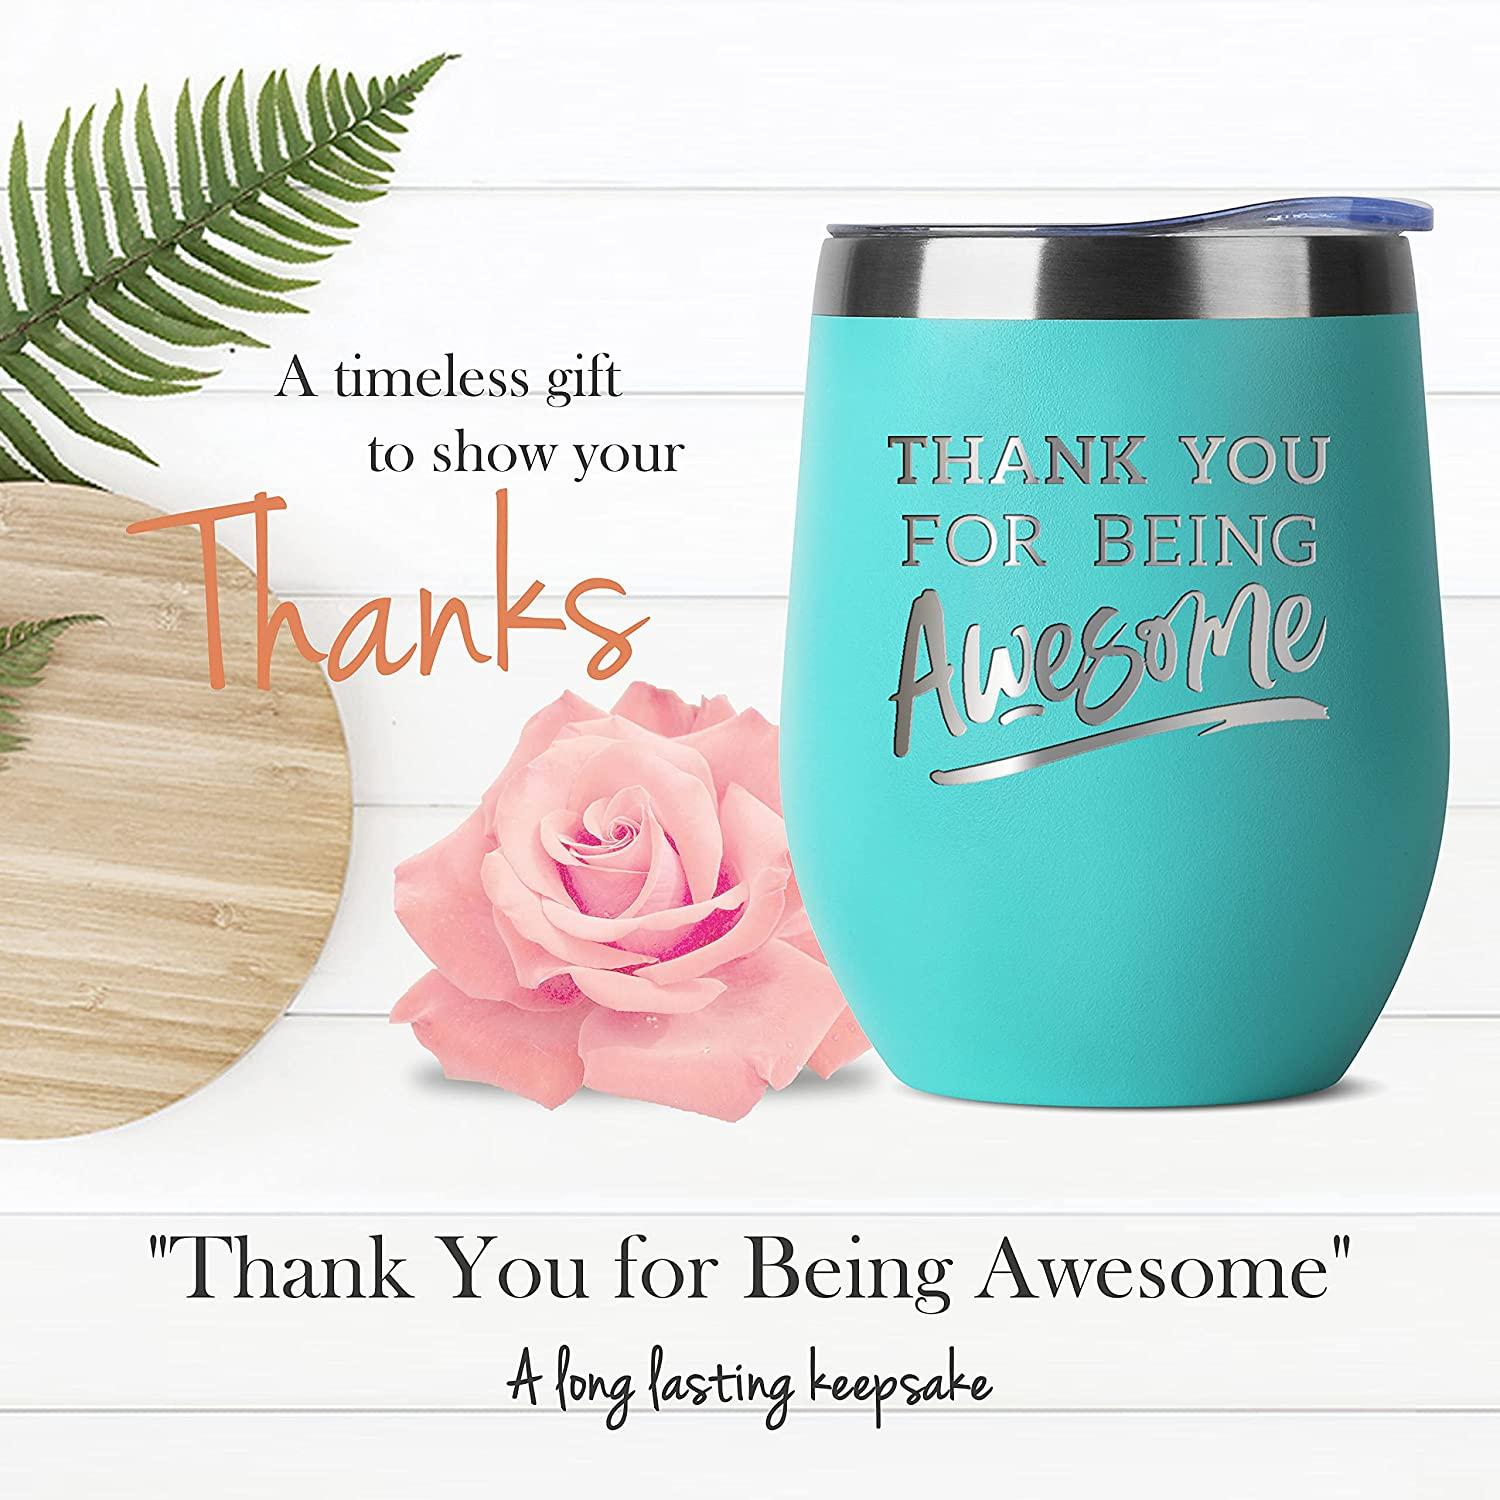 Thank You Gifts for Women Spa Thoughtful Unique Office Gifts for Coworkers  Nurse Friends Men Boss Employee Secretary Hostess Teacher Mom Her